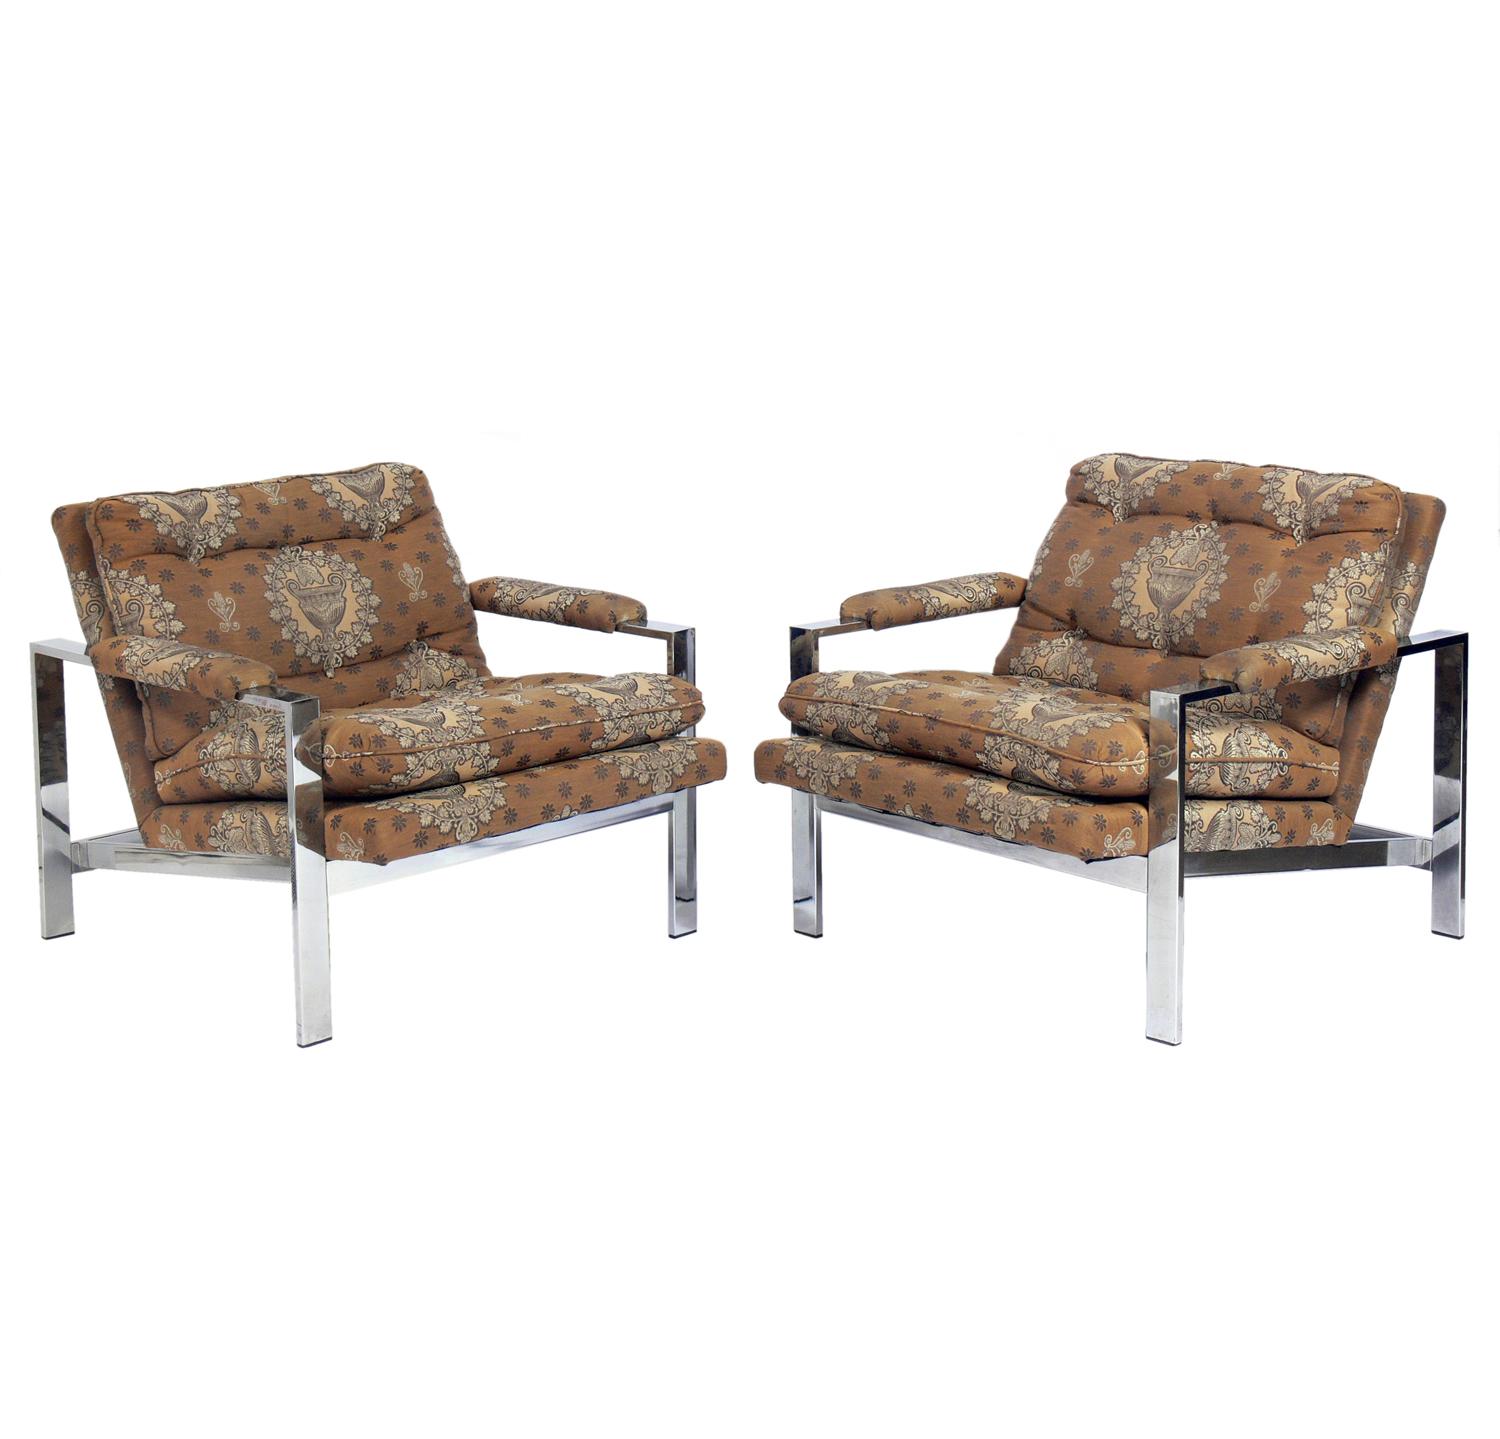 Pair of clean lined chrome lounge chairs, by Milo Baughman for Thayer Coggin, American, circa 1960s. These chairs are currently being reupholstered and can be completed in your fabric. The price noted includes reupholstery in your fabric. Simply